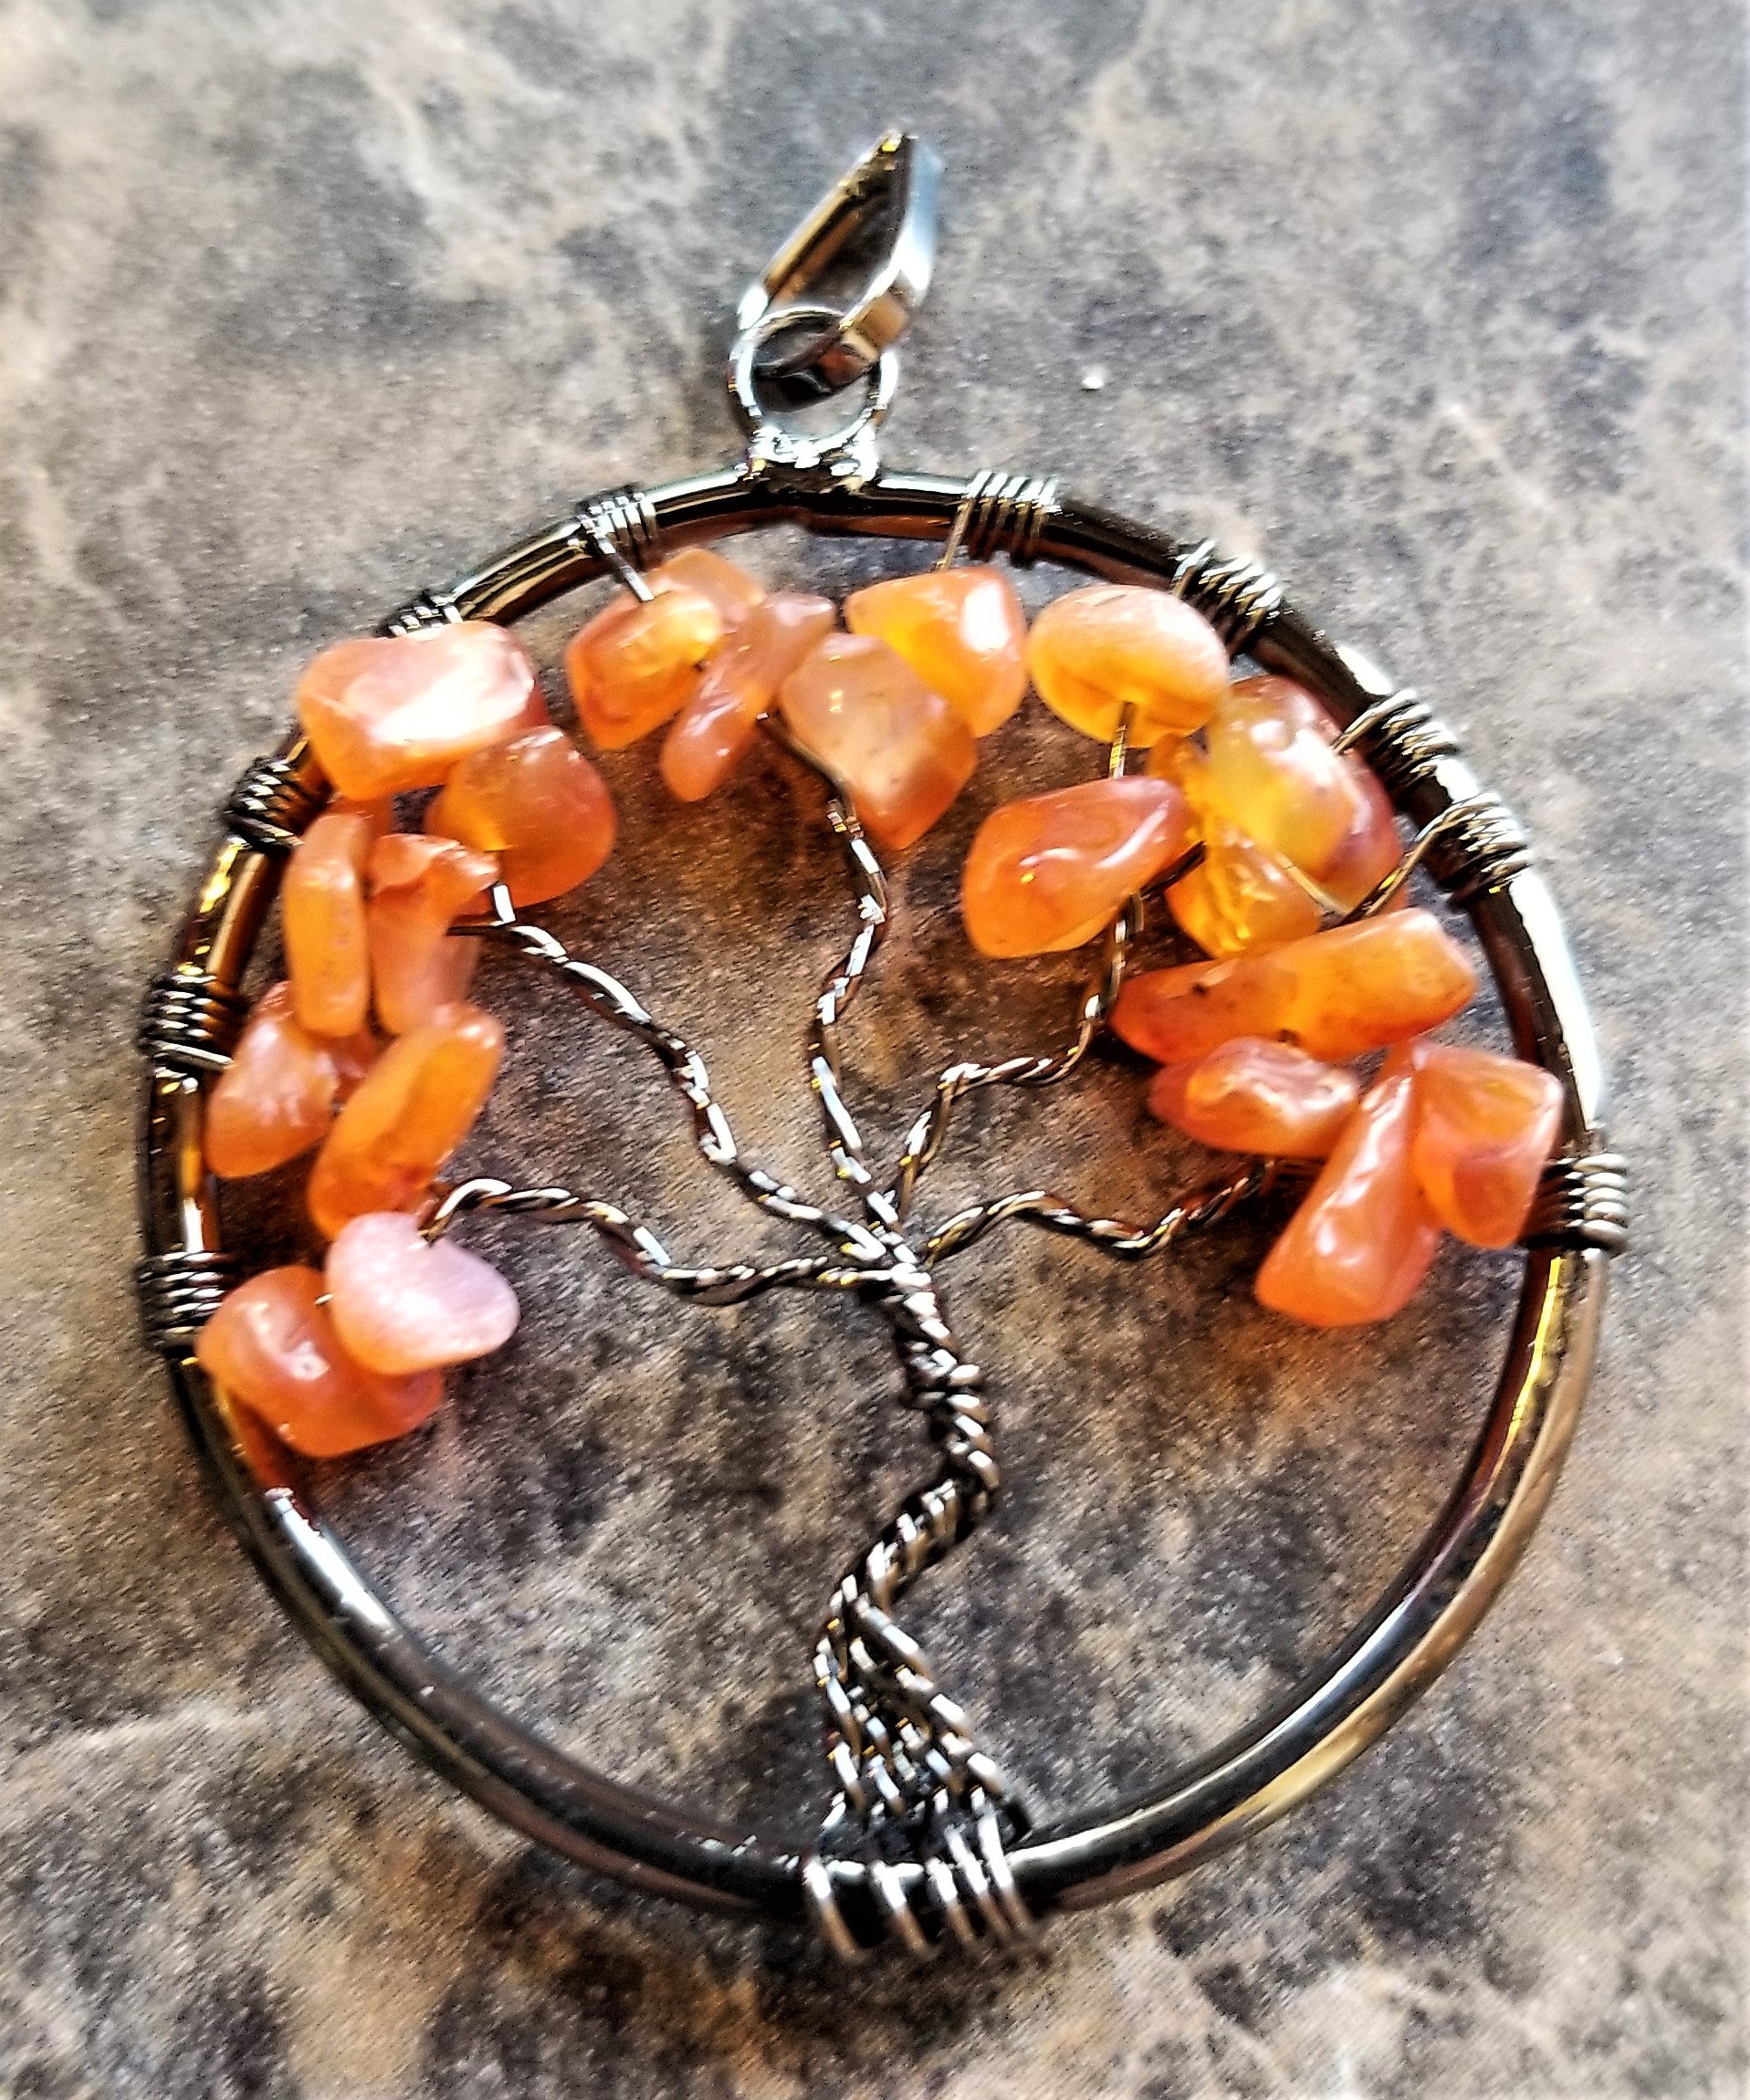 Stunning Tree of Life Pendant with Carnelian Stones set in Rose Gold or Antique Blacken Silver